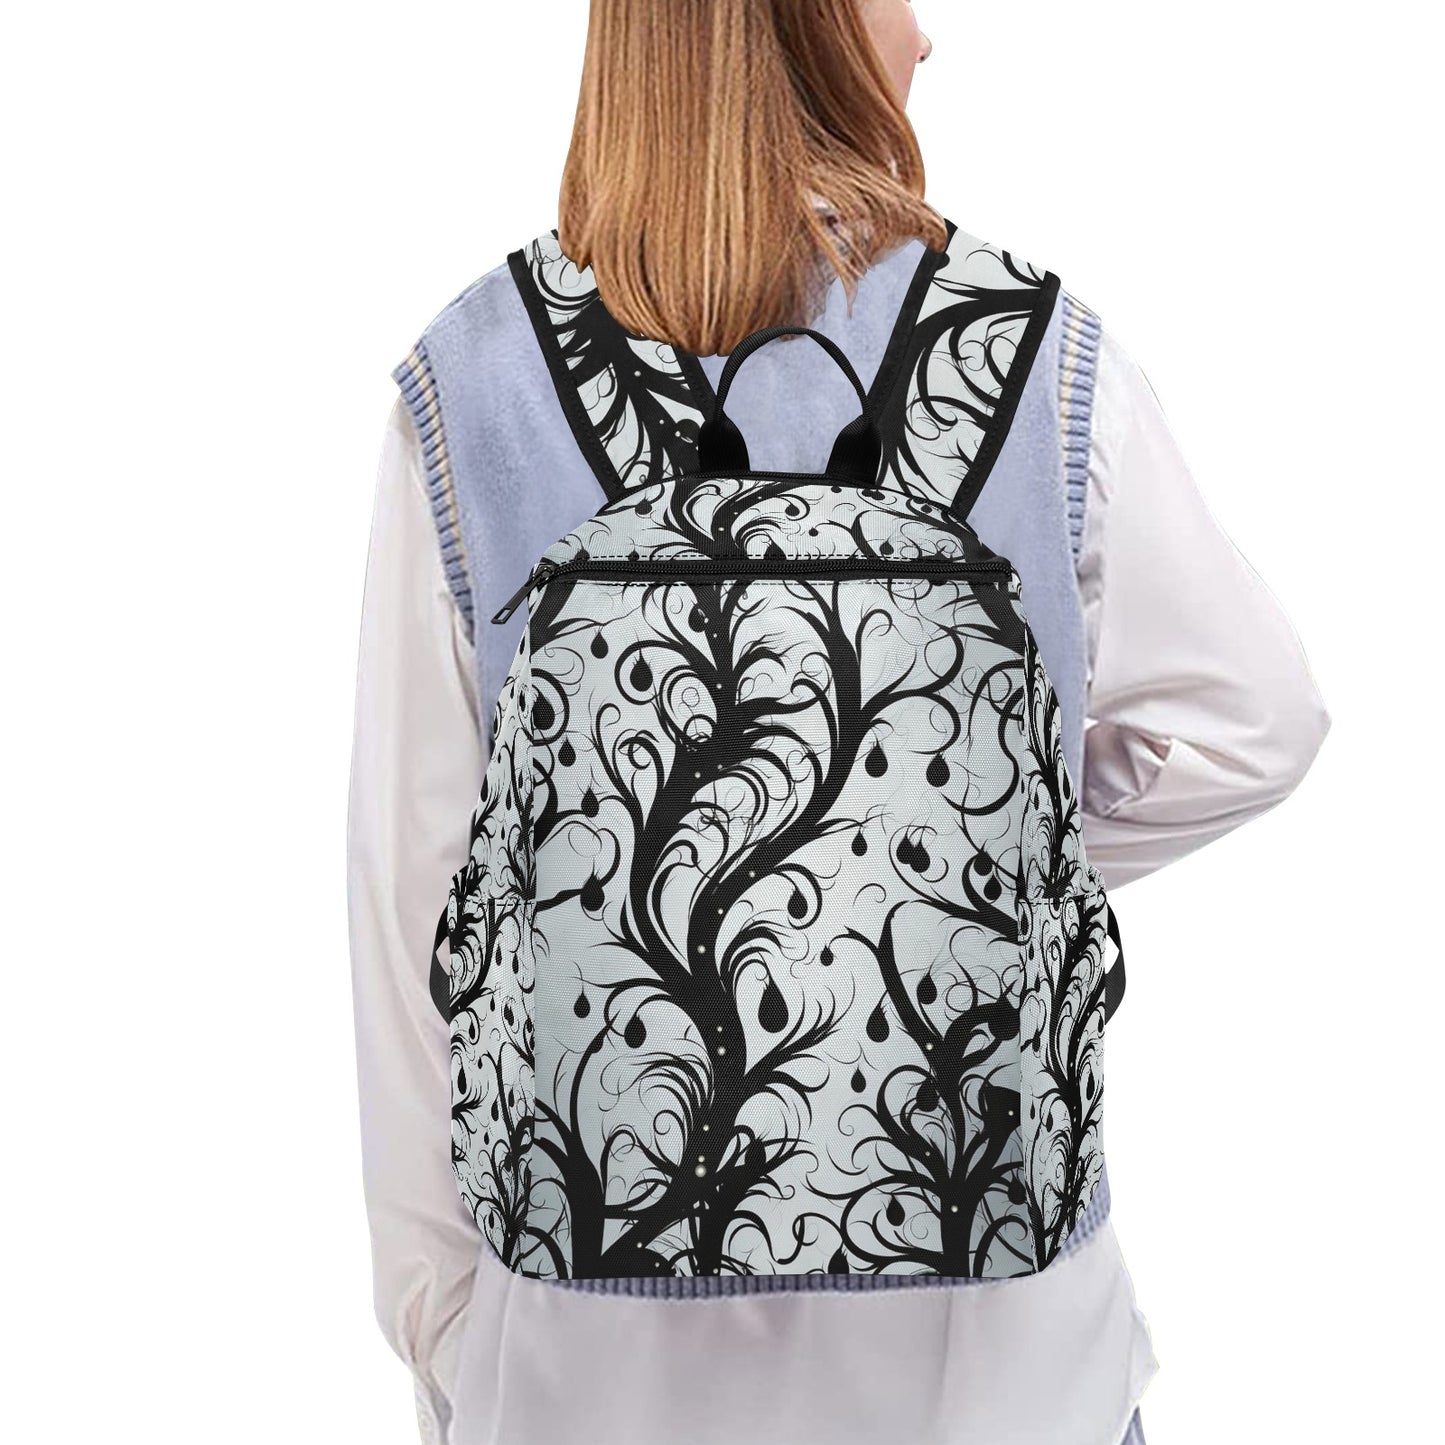 Vines Of Darkness Lightweight Casual Backpack